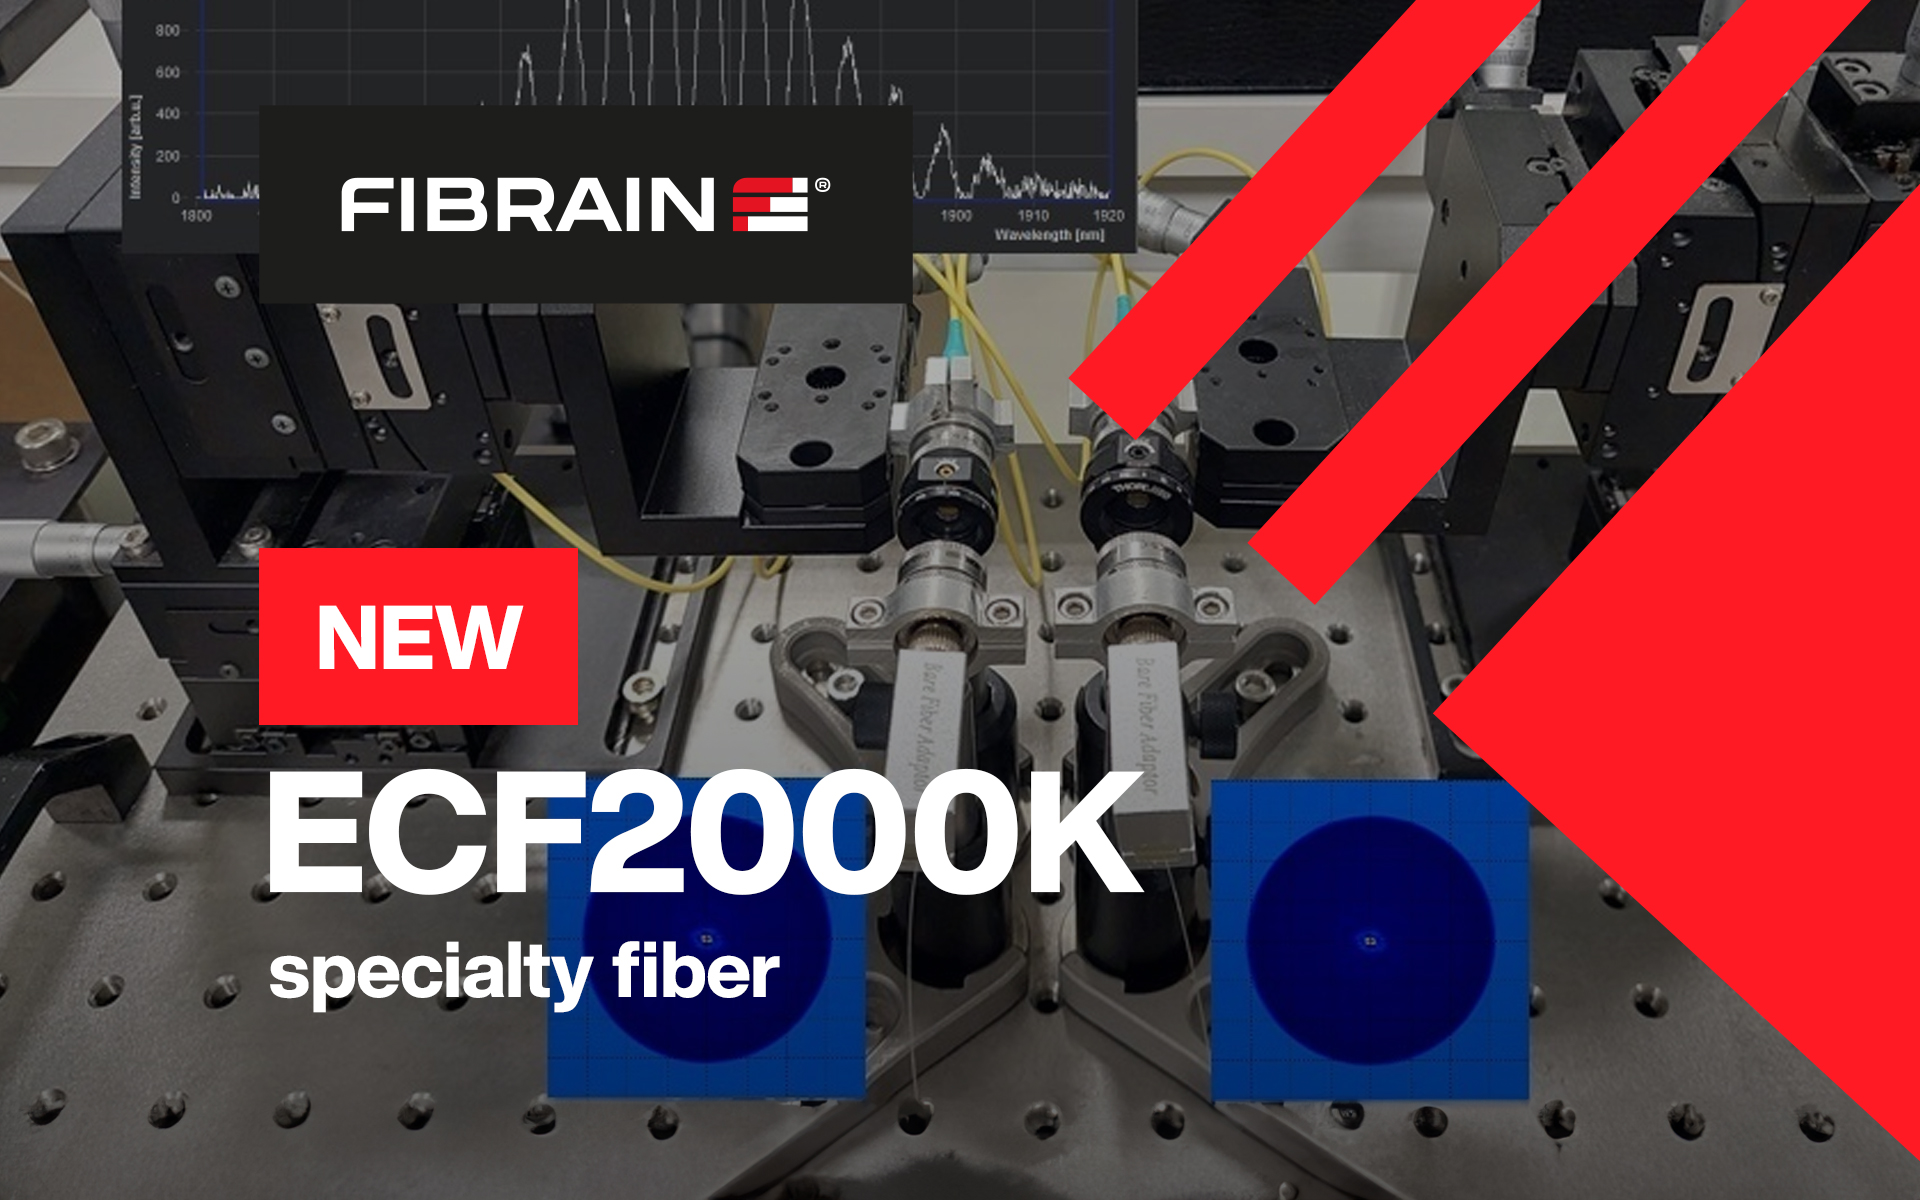 ECF2000K — will FIBRAIN’s new product conquer the specialty fiber optics market? Find out today!